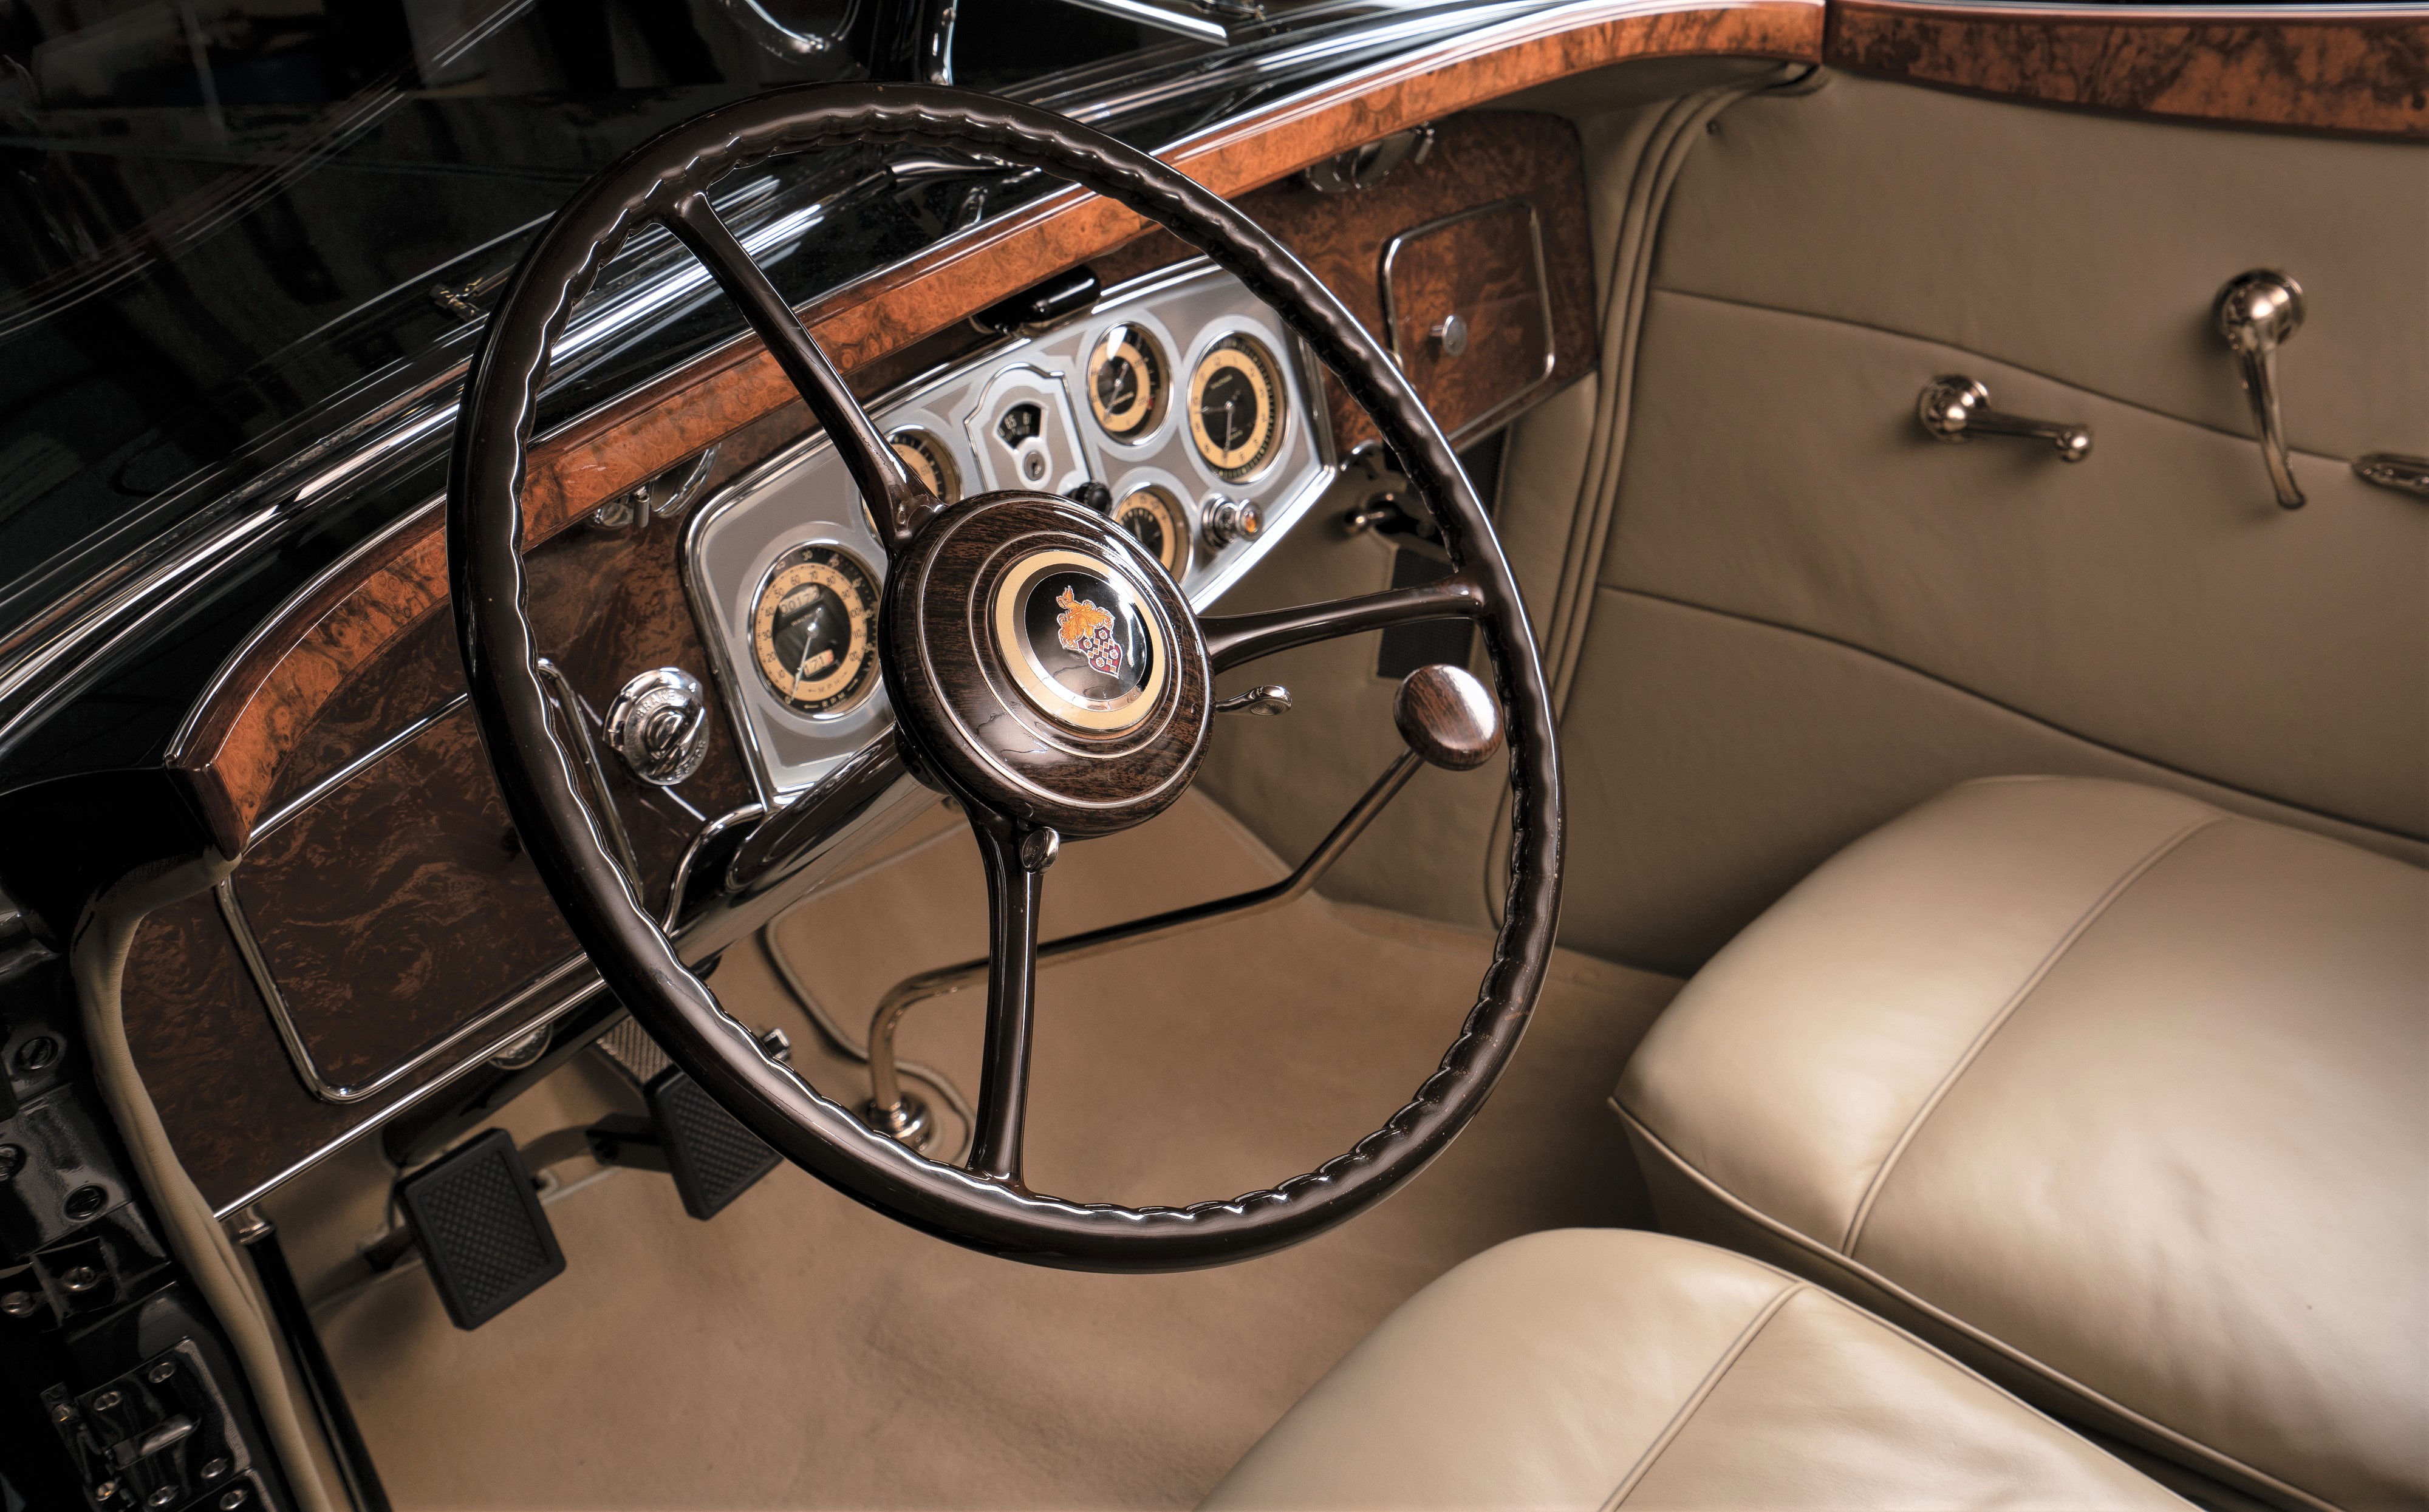 The Packard's luxury interior is beautifully appointed 